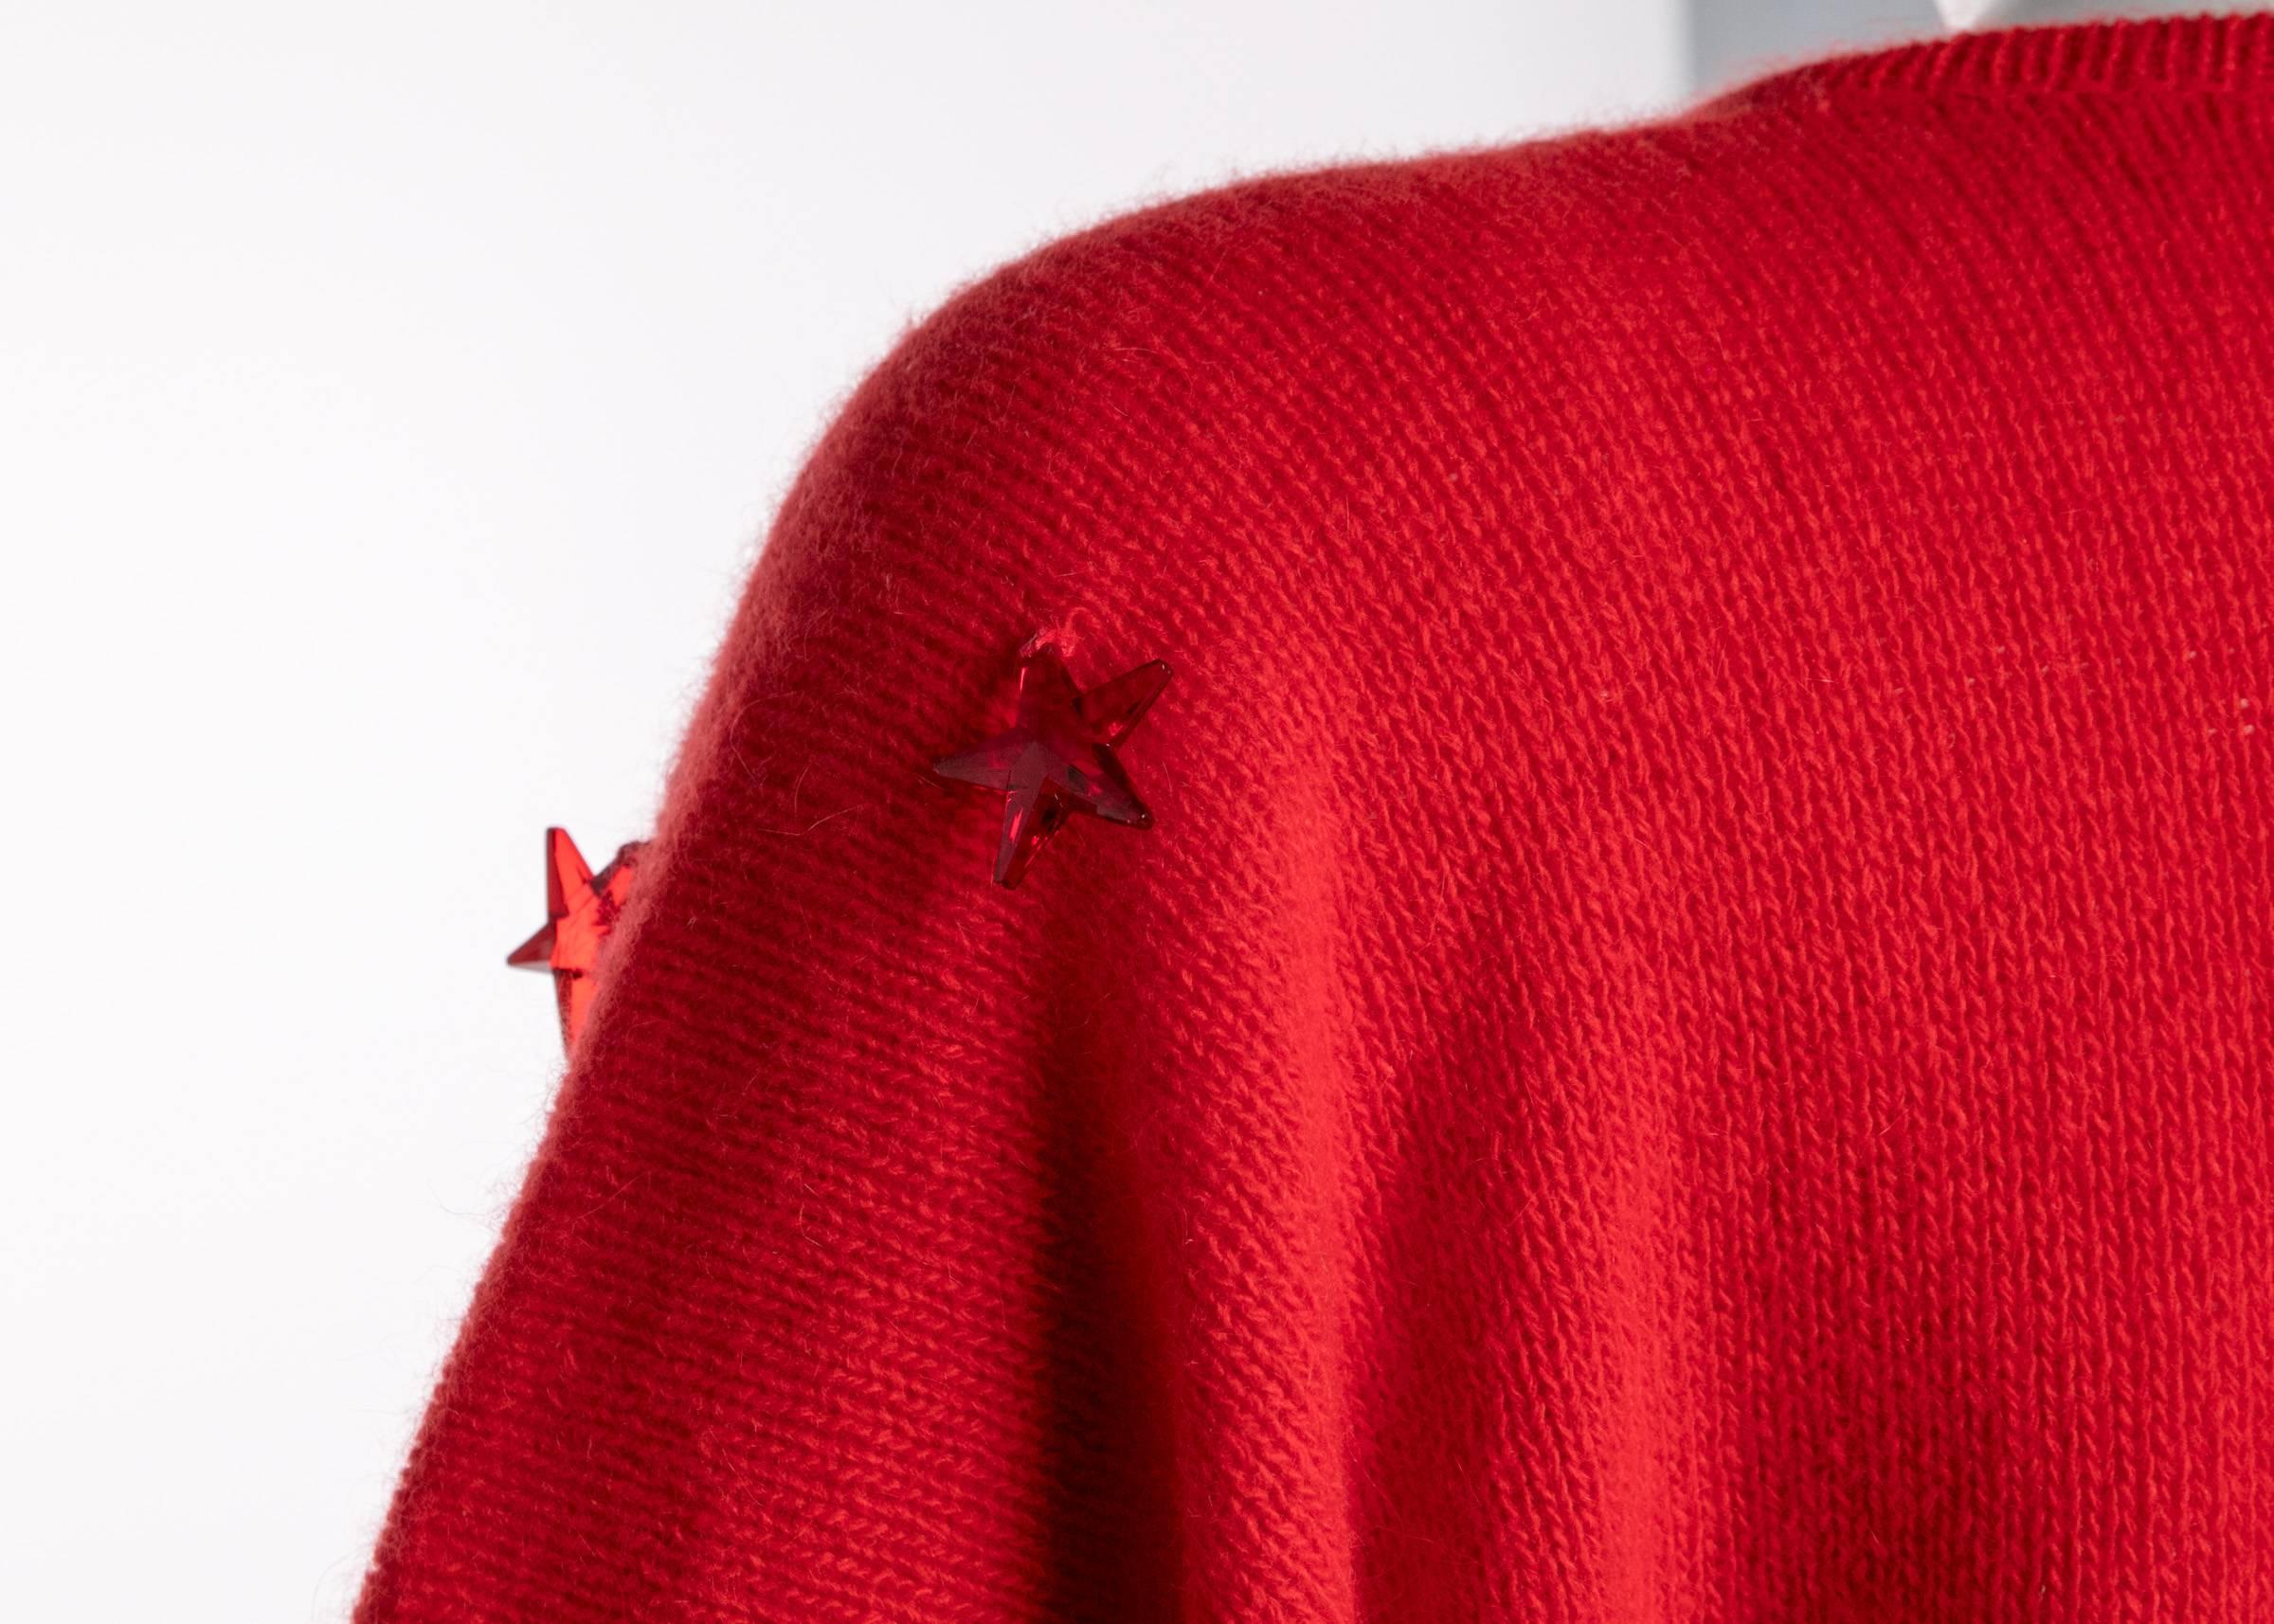 1980s Krizia Red Wool Angora Lucite Star Beads Sweater In Excellent Condition For Sale In Boca Raton, FL